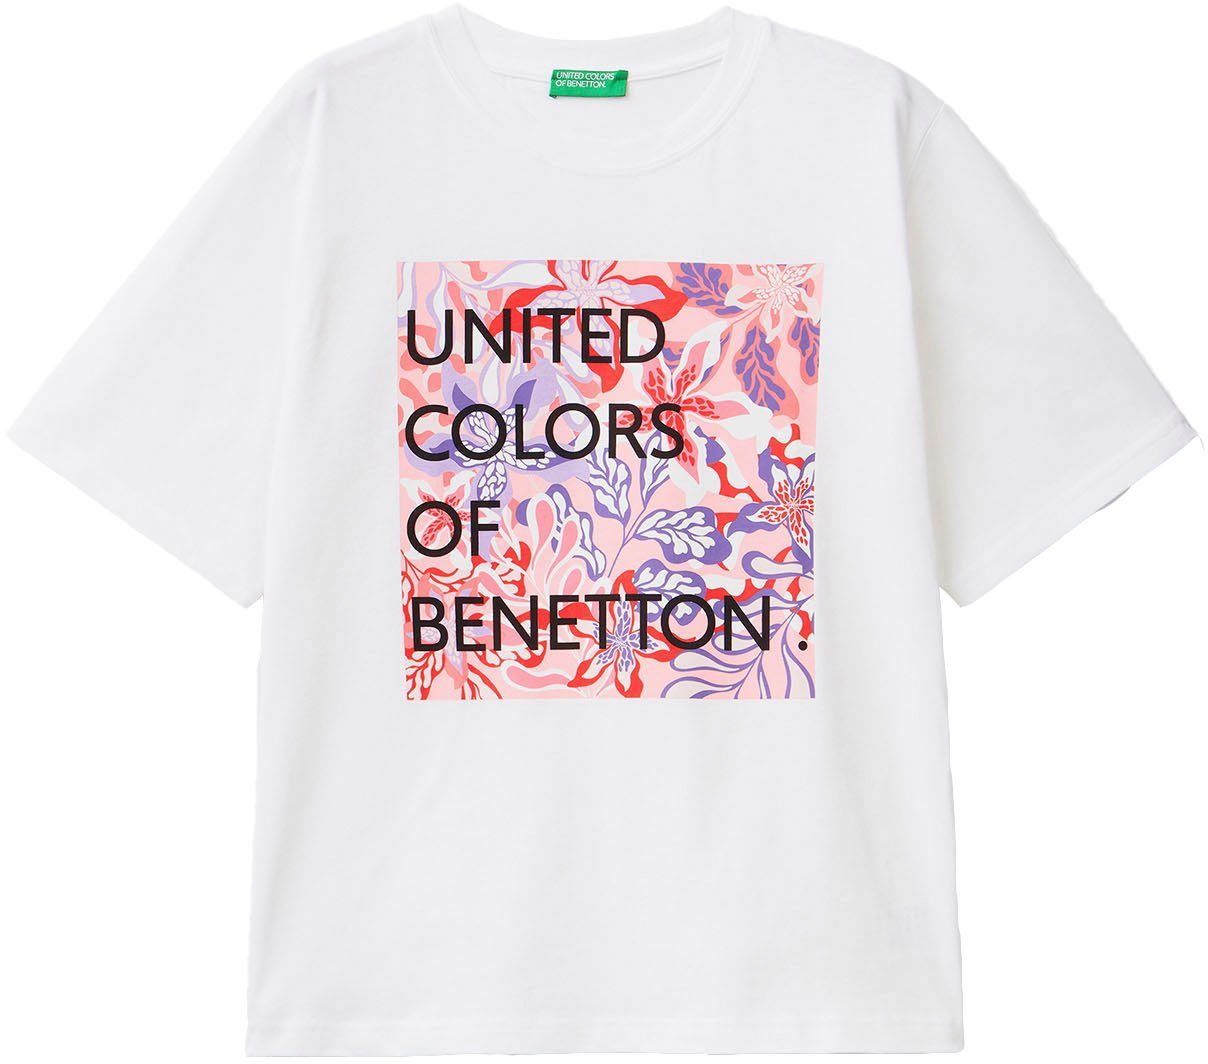 United Colors of pink T-Shirt weiß mit Benetton